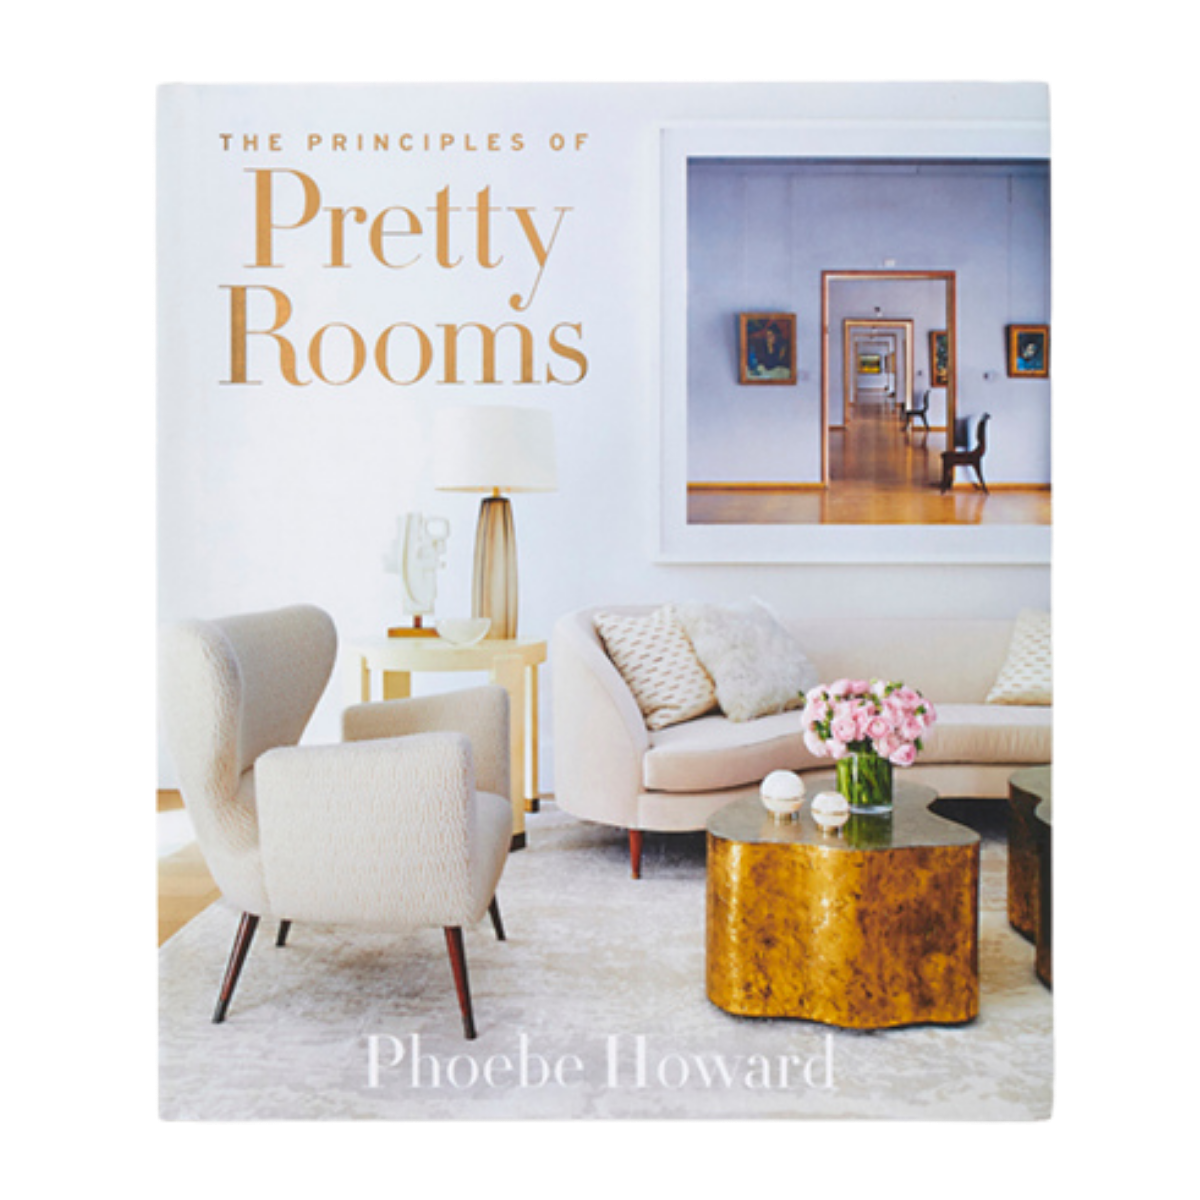 "The Principles of Pretty Rooms"